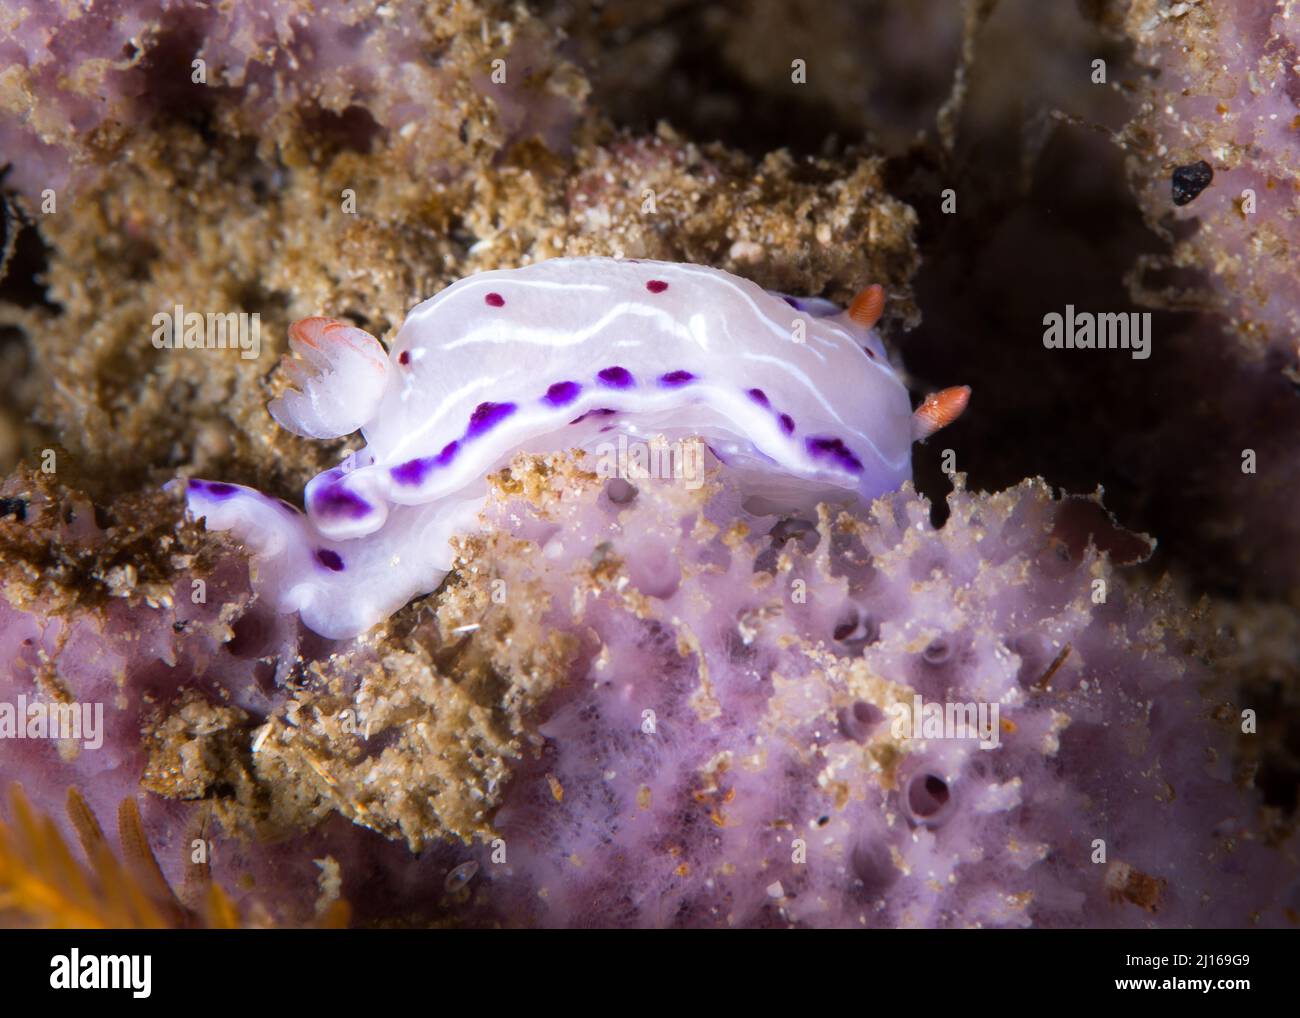 Cape dorid (Hypselodoris capensis) nudibranch underwater, a white-bodied sea slug with purple-spotted margin and white lines and red spots Stock Photo